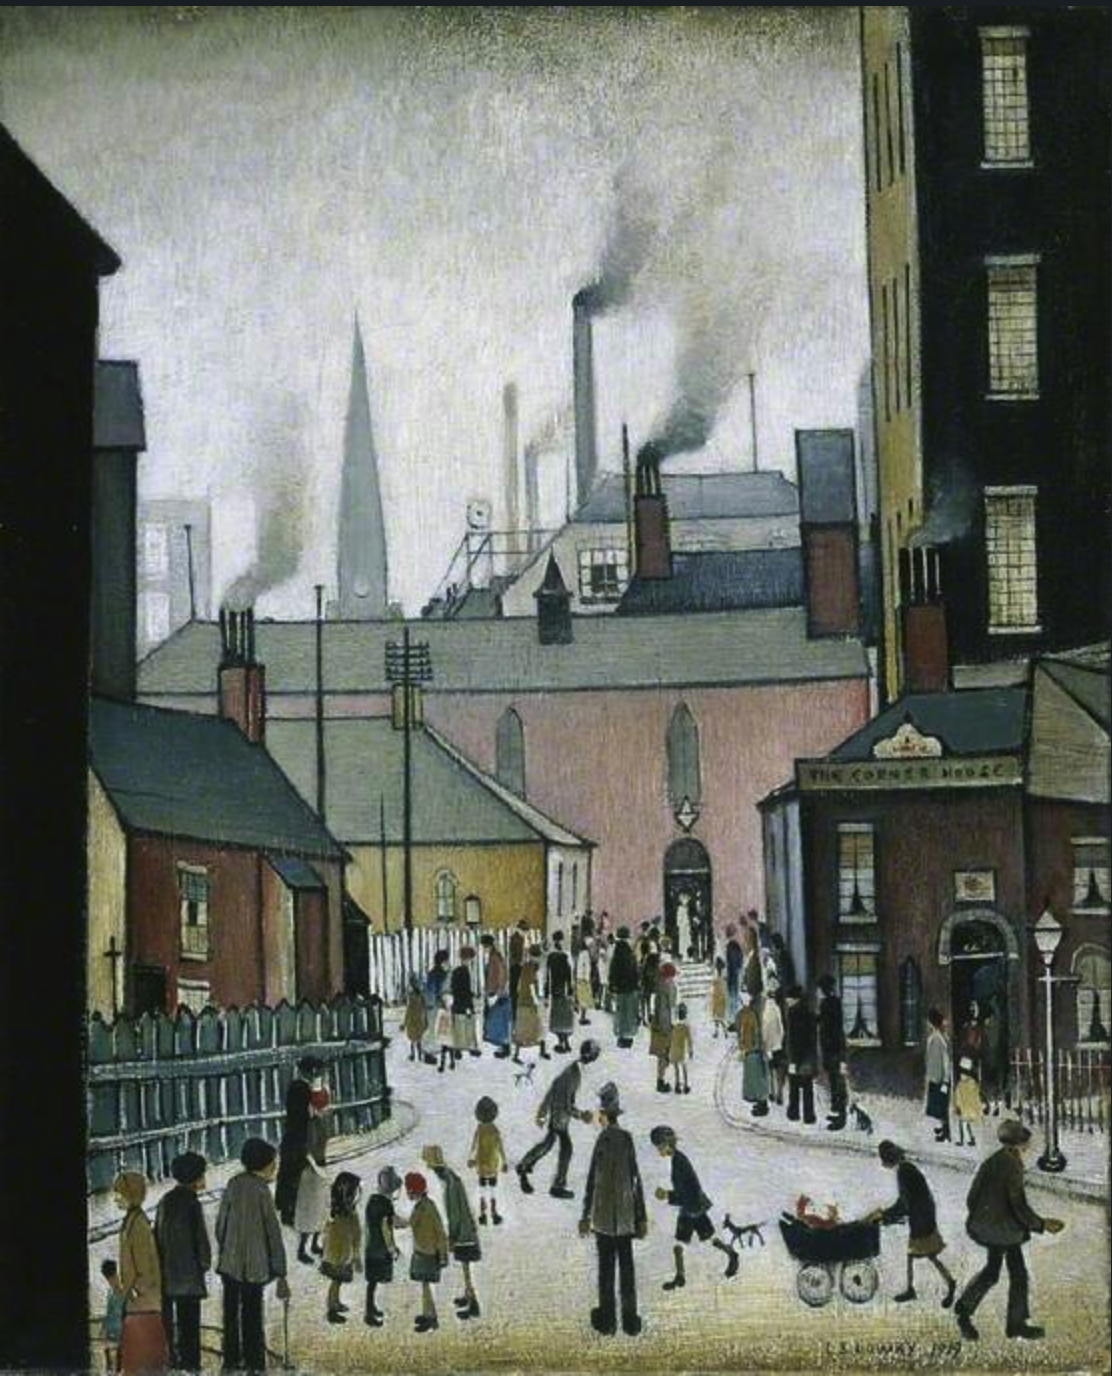 After the Wedding (1939) by Laurence Stephen Lowry (1887 - 1976), English artist.